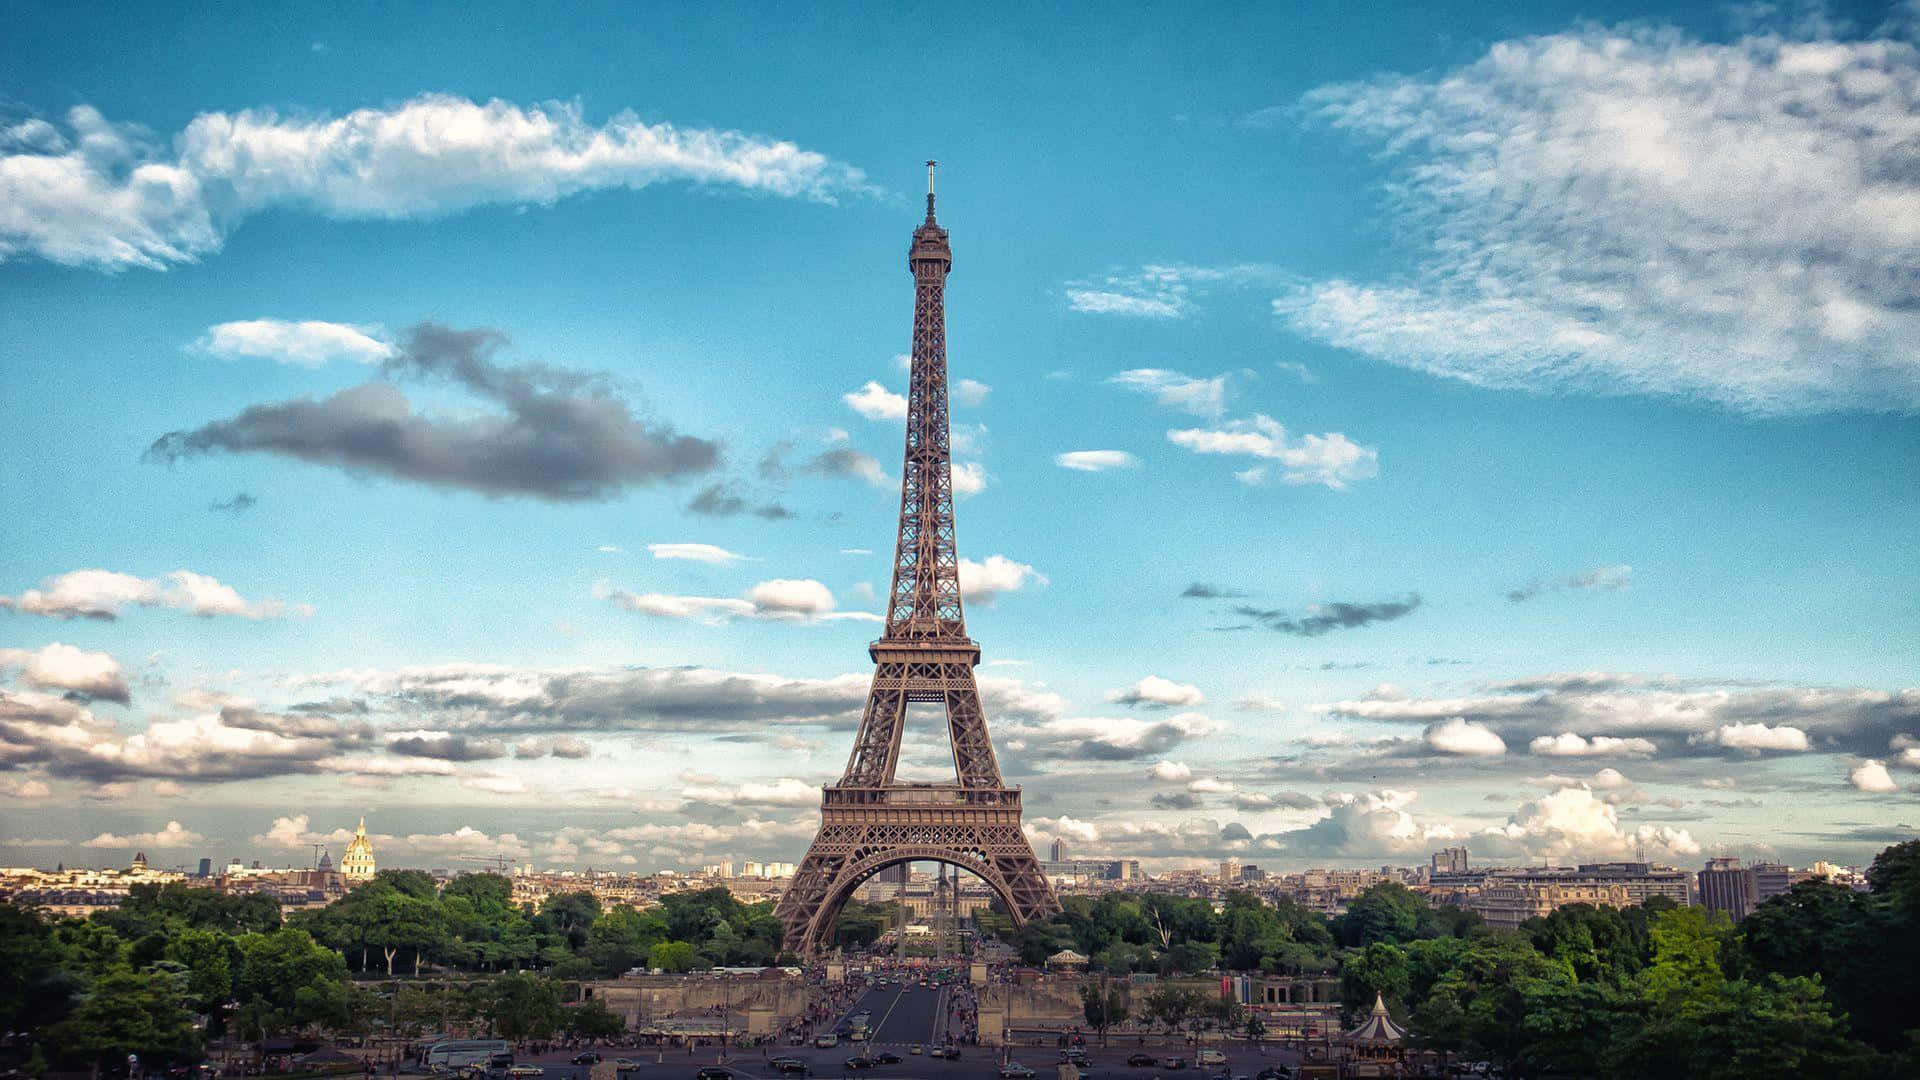 Catch a view of the iconic Eiffel Tower in Paris.